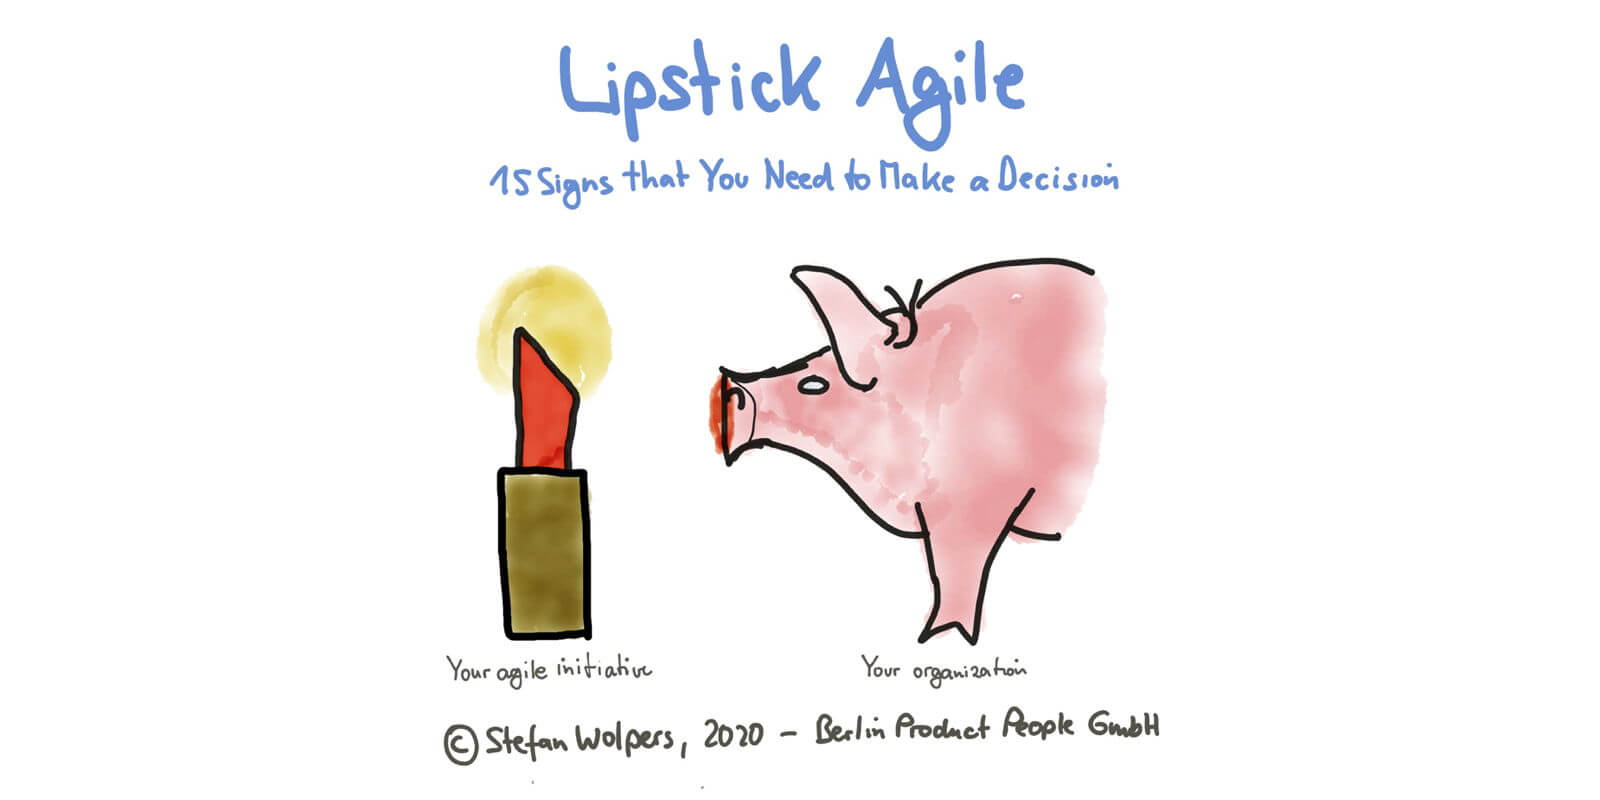 Lipstick Agile — 15 Signs You Probably Need a New Job or to Roll-up Your Proverbial Sleeves